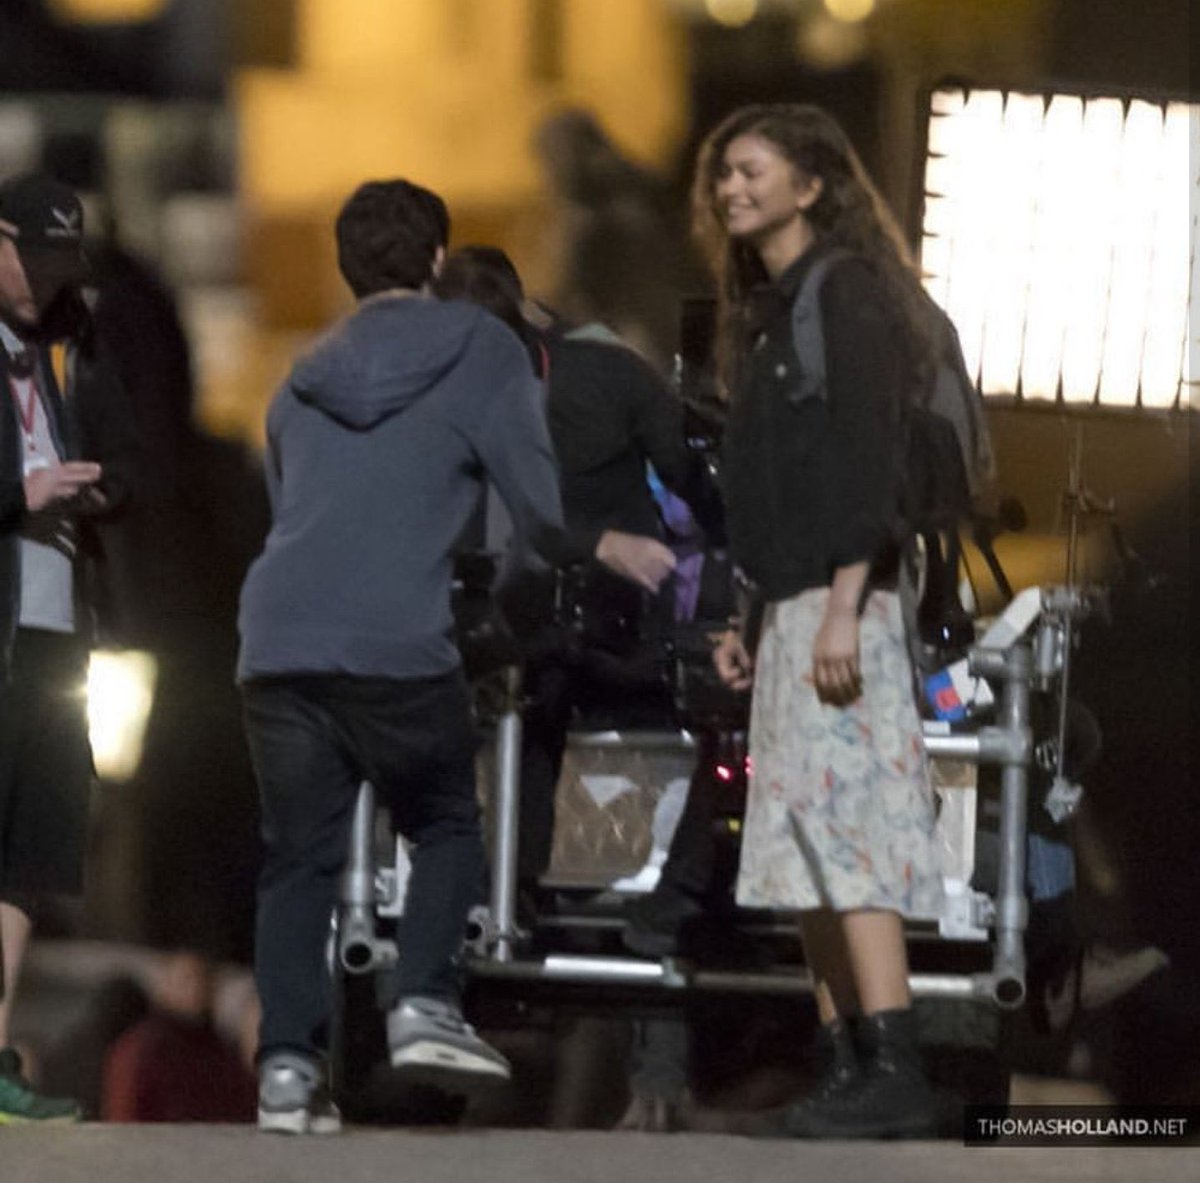 RT @tomhollandfiles: tom holland and zendaya behind the scenes of spider-man: far from home (2019) https://t.co/gshh9eGAkn